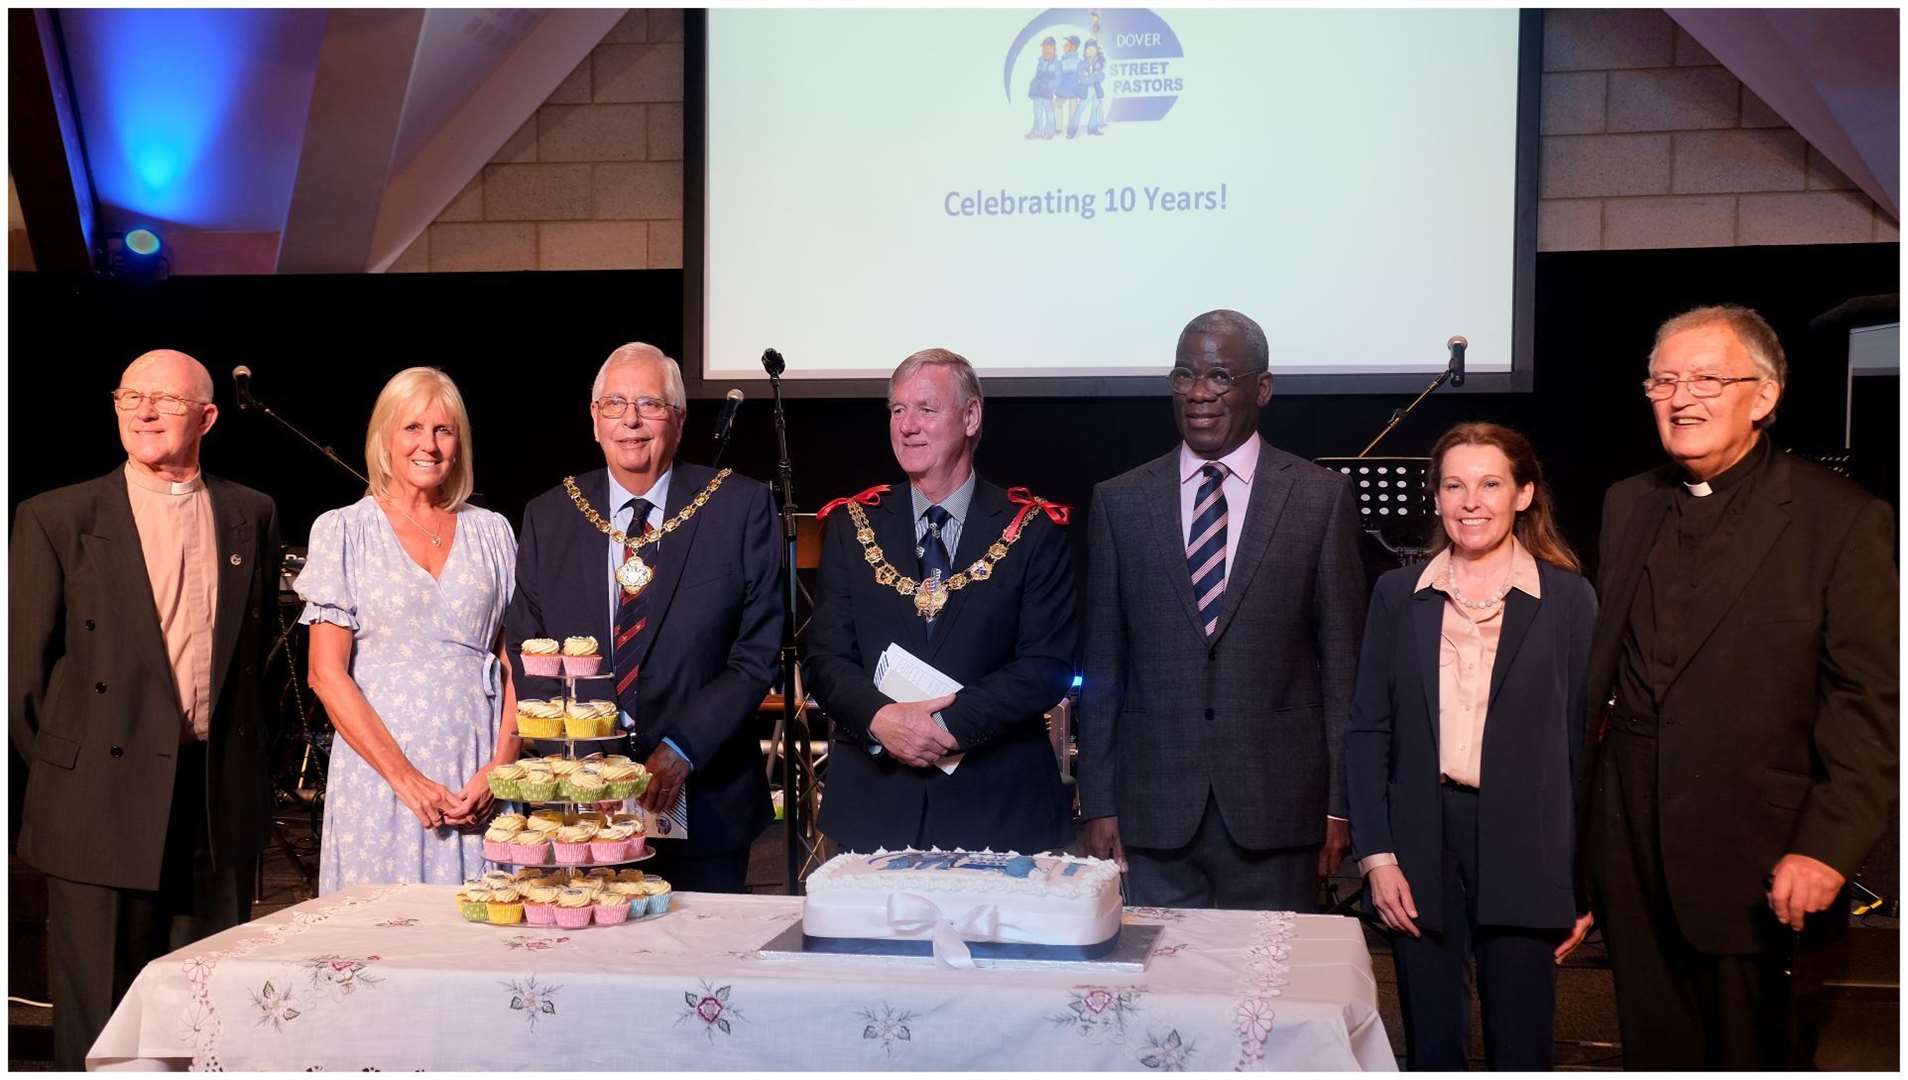 Special guests and speakers at the Dover Street Pastors anniversary celebration. Picture by Marie McMonagle